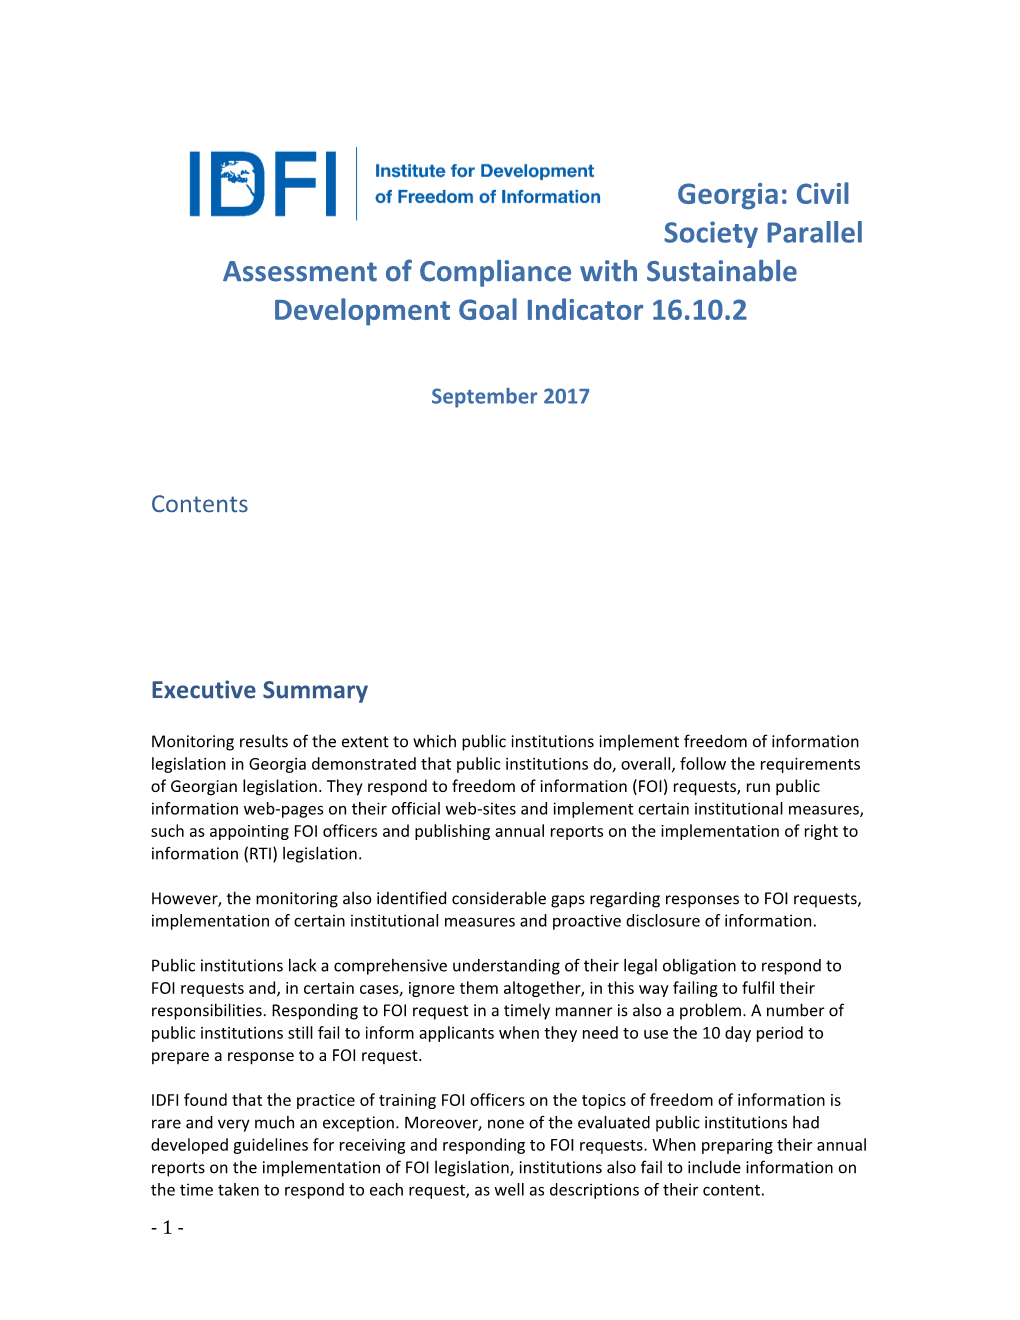 Georgia: Civil Society Parallel Assessment of Compliance with Sustainable Development